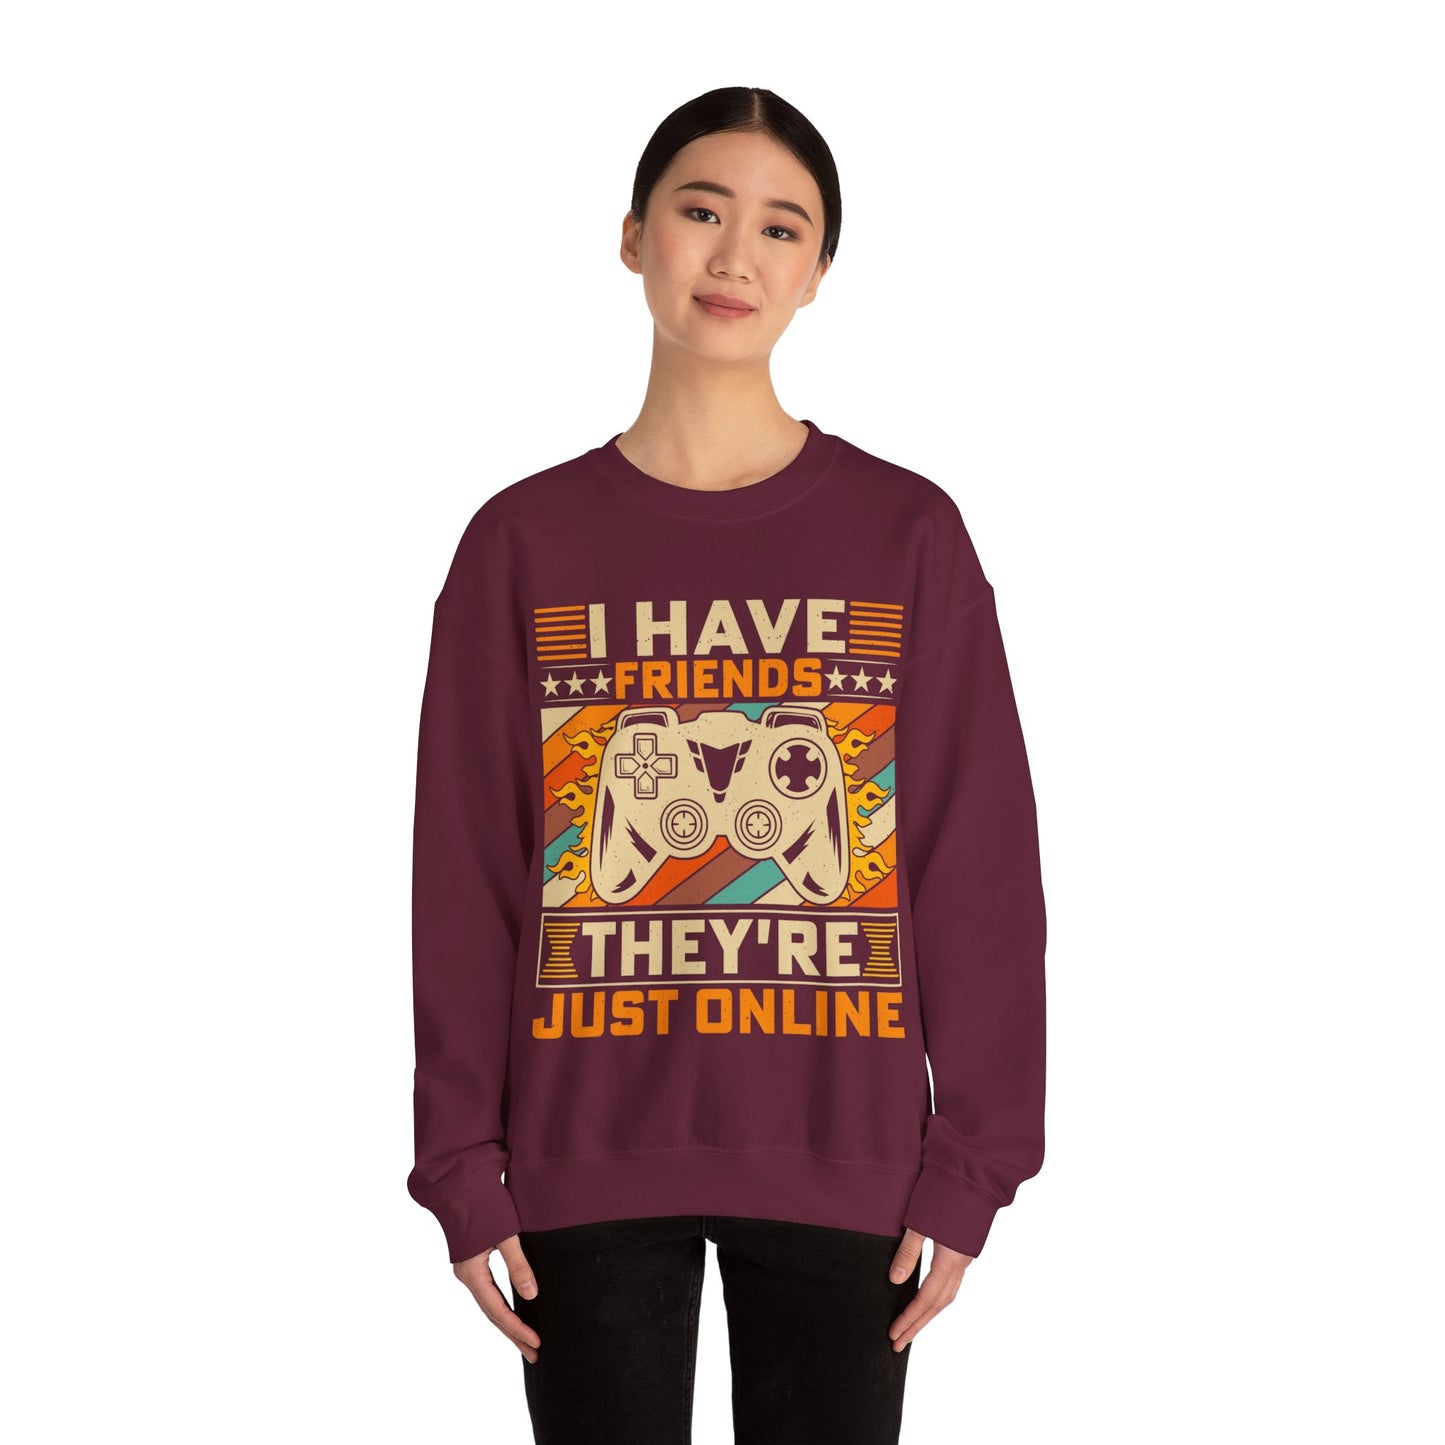 I have friends they're just online Sweatshirt